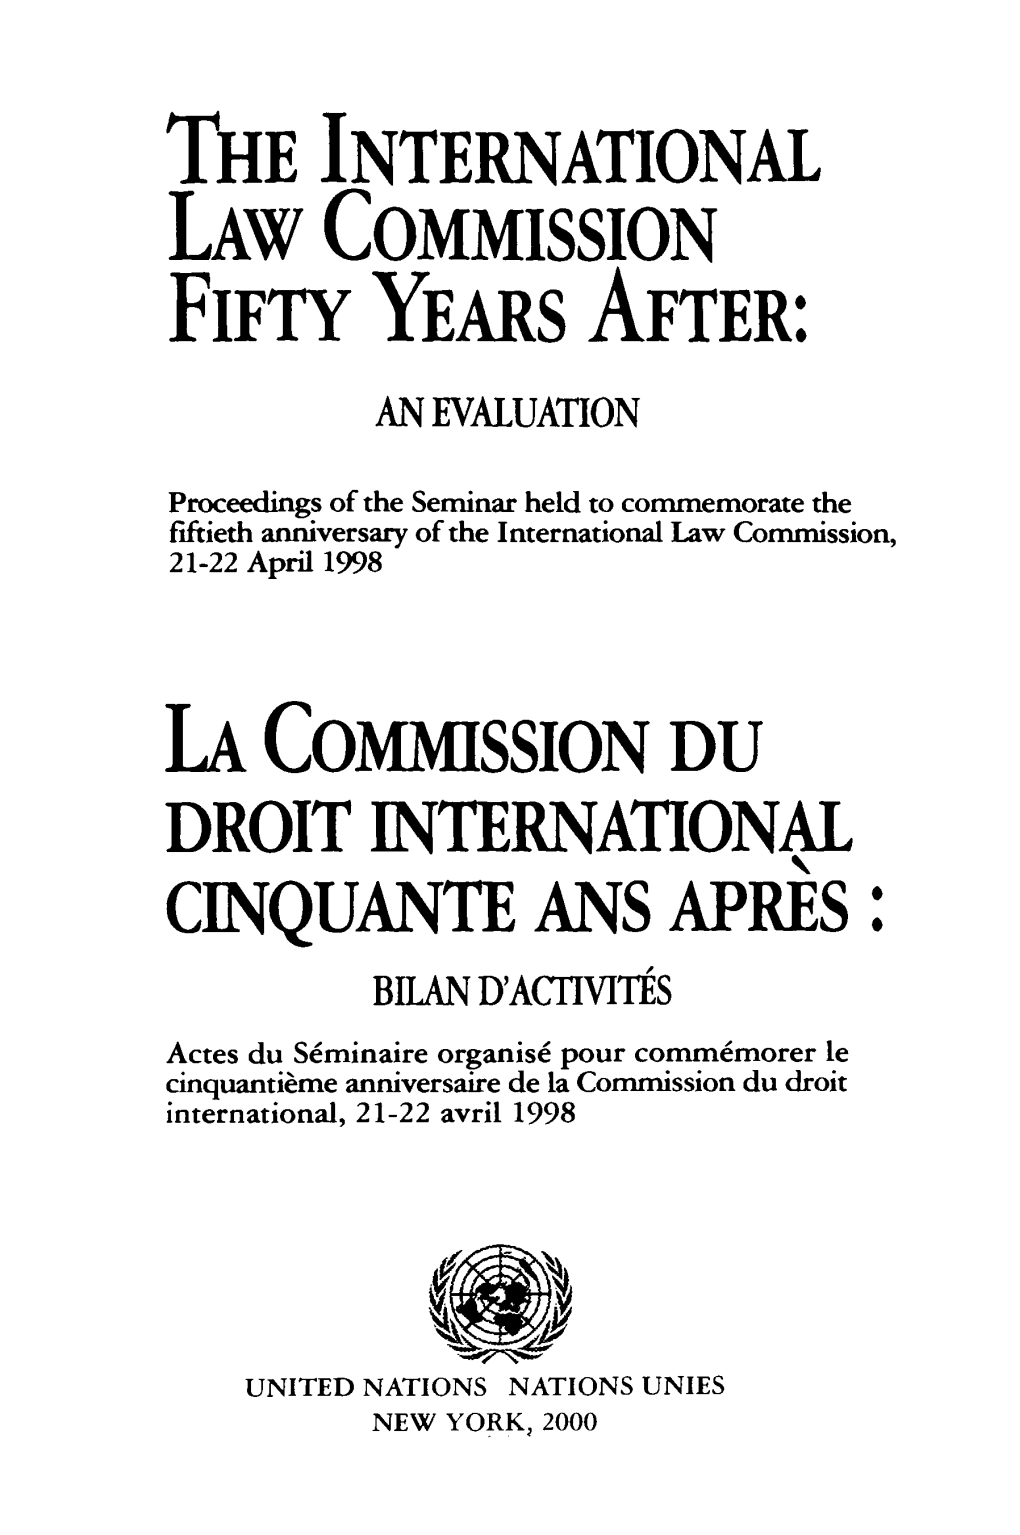 The International Law Commission Fifty Years After: an Evaluation